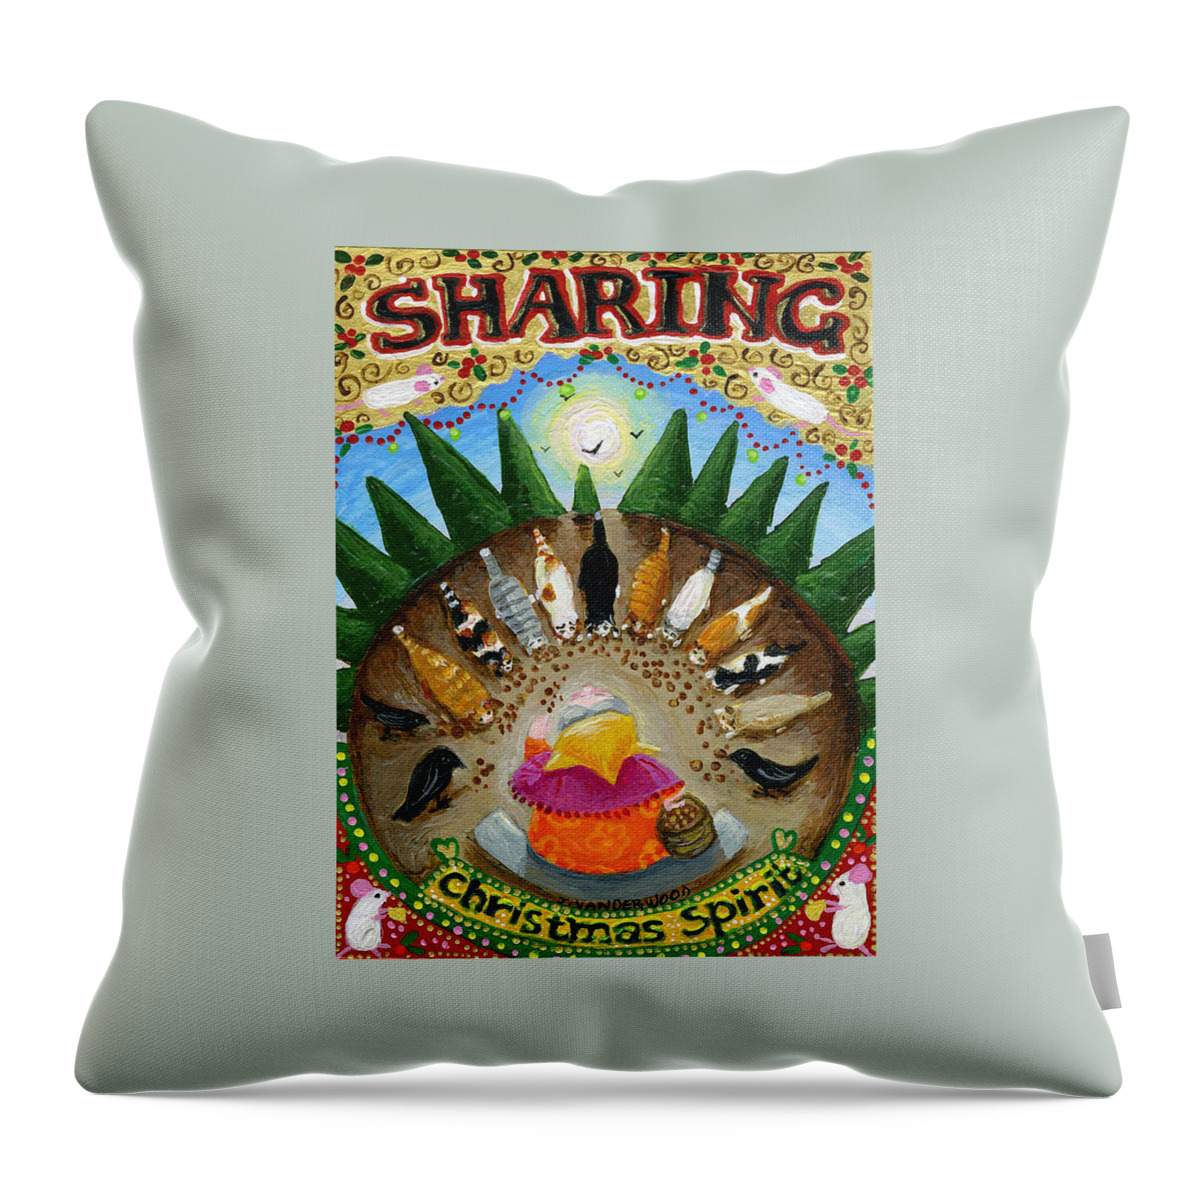 Cats Throw Pillow featuring the painting Sharing Christmas Spirit by Jacquelin L Vanderwood Westerman